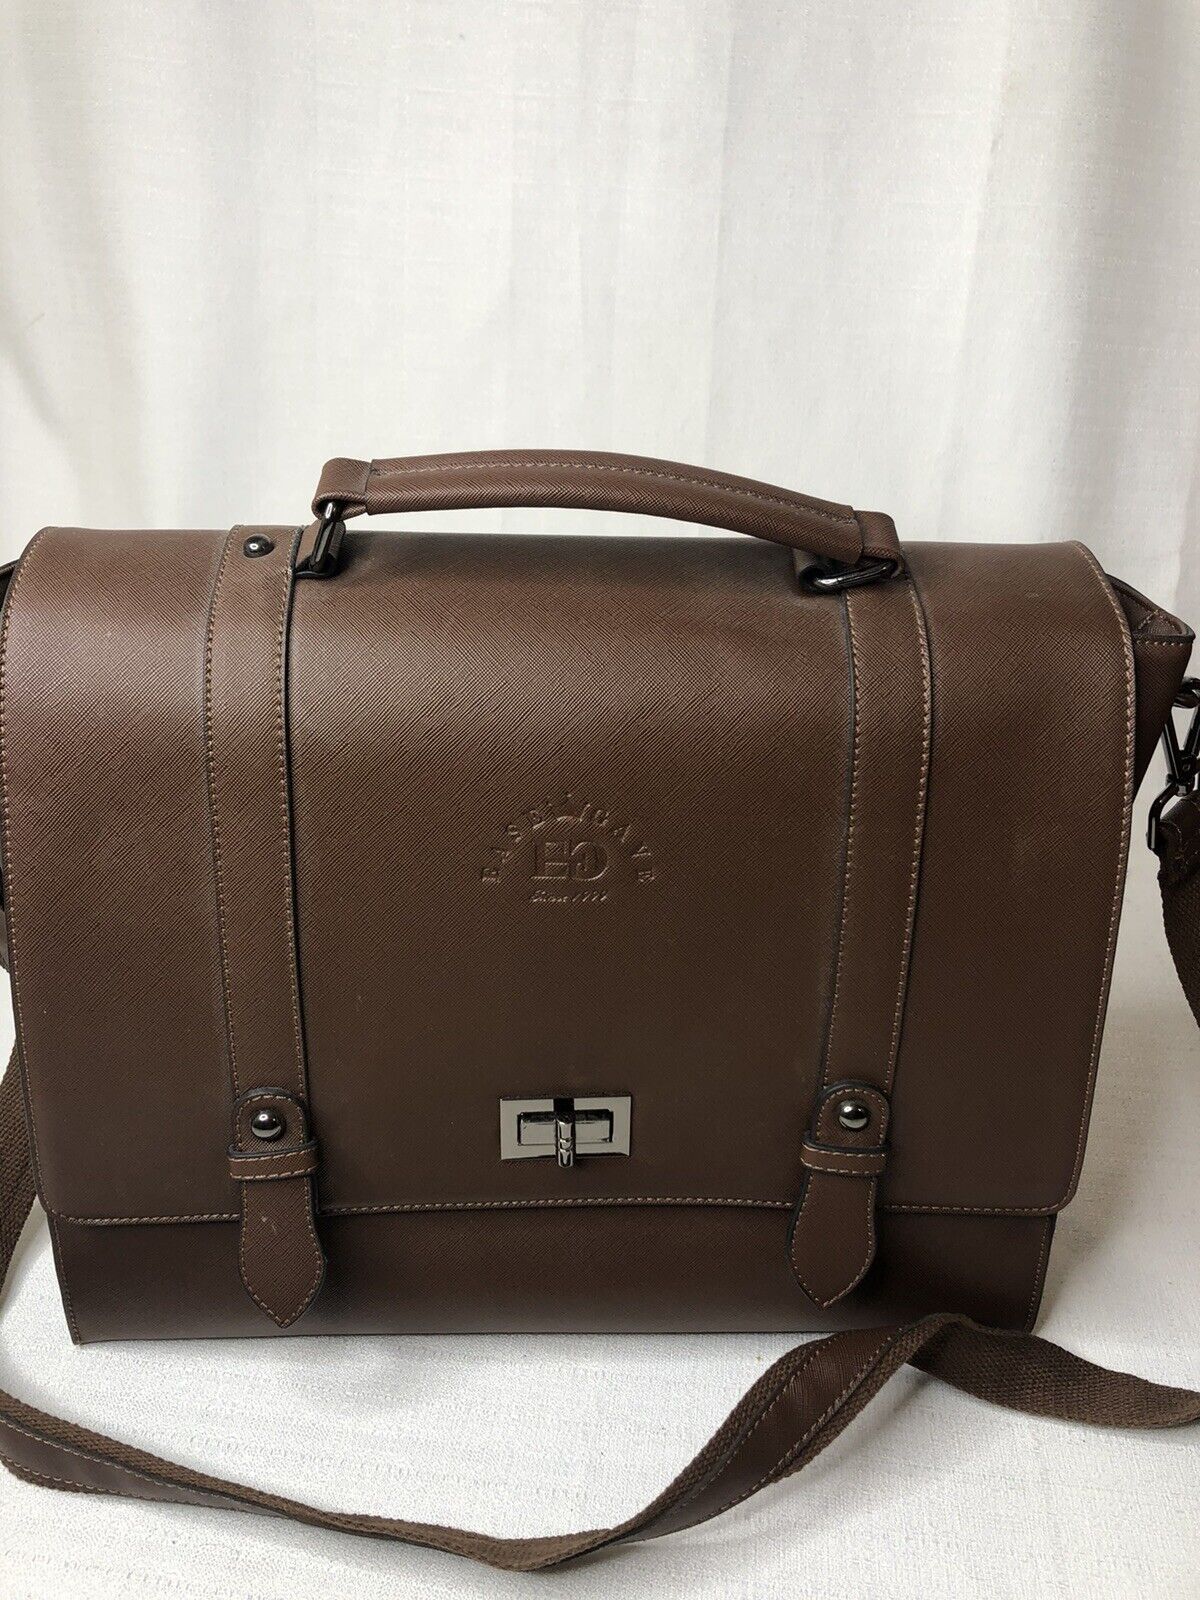 Tote Laptop Bag Work Briefcase Brown Case Handle And Strap Roomy Large Refined